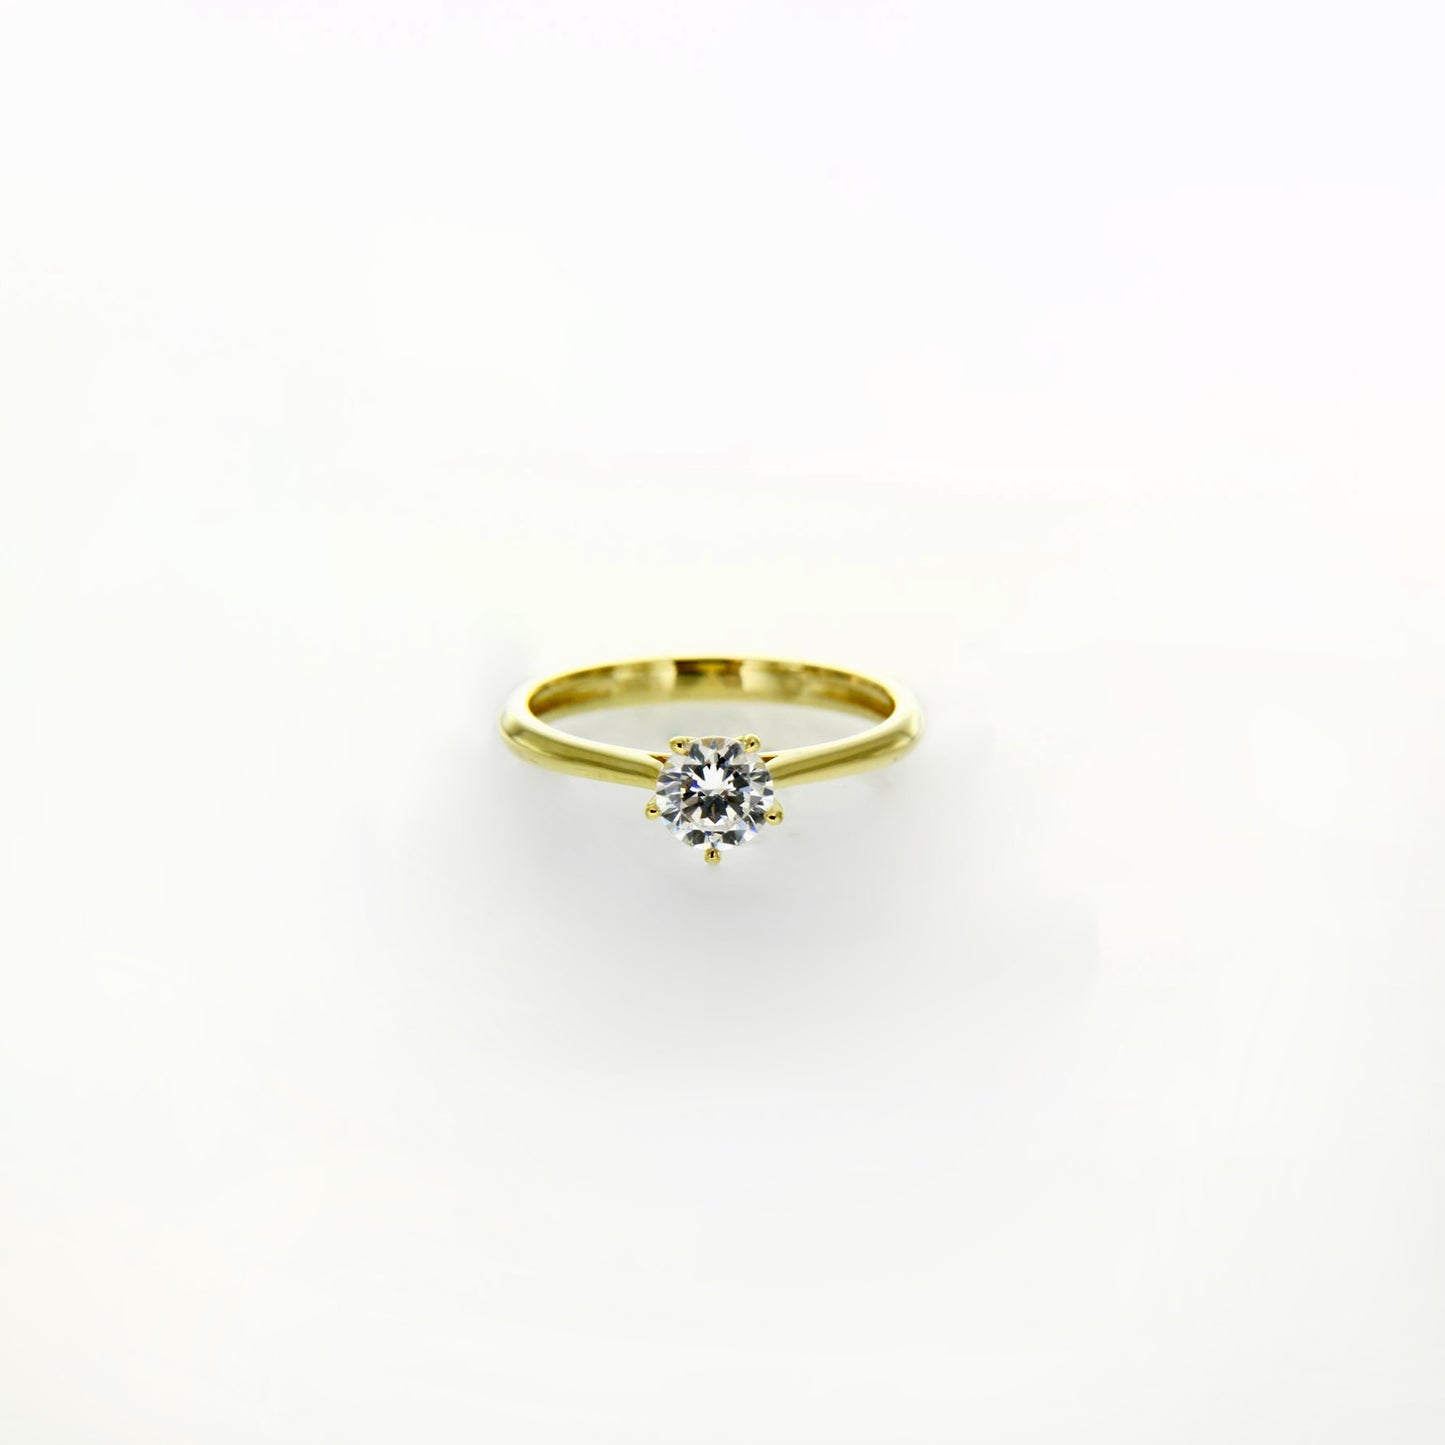 Elegant 14K Yellow Gold Solitaire Ring